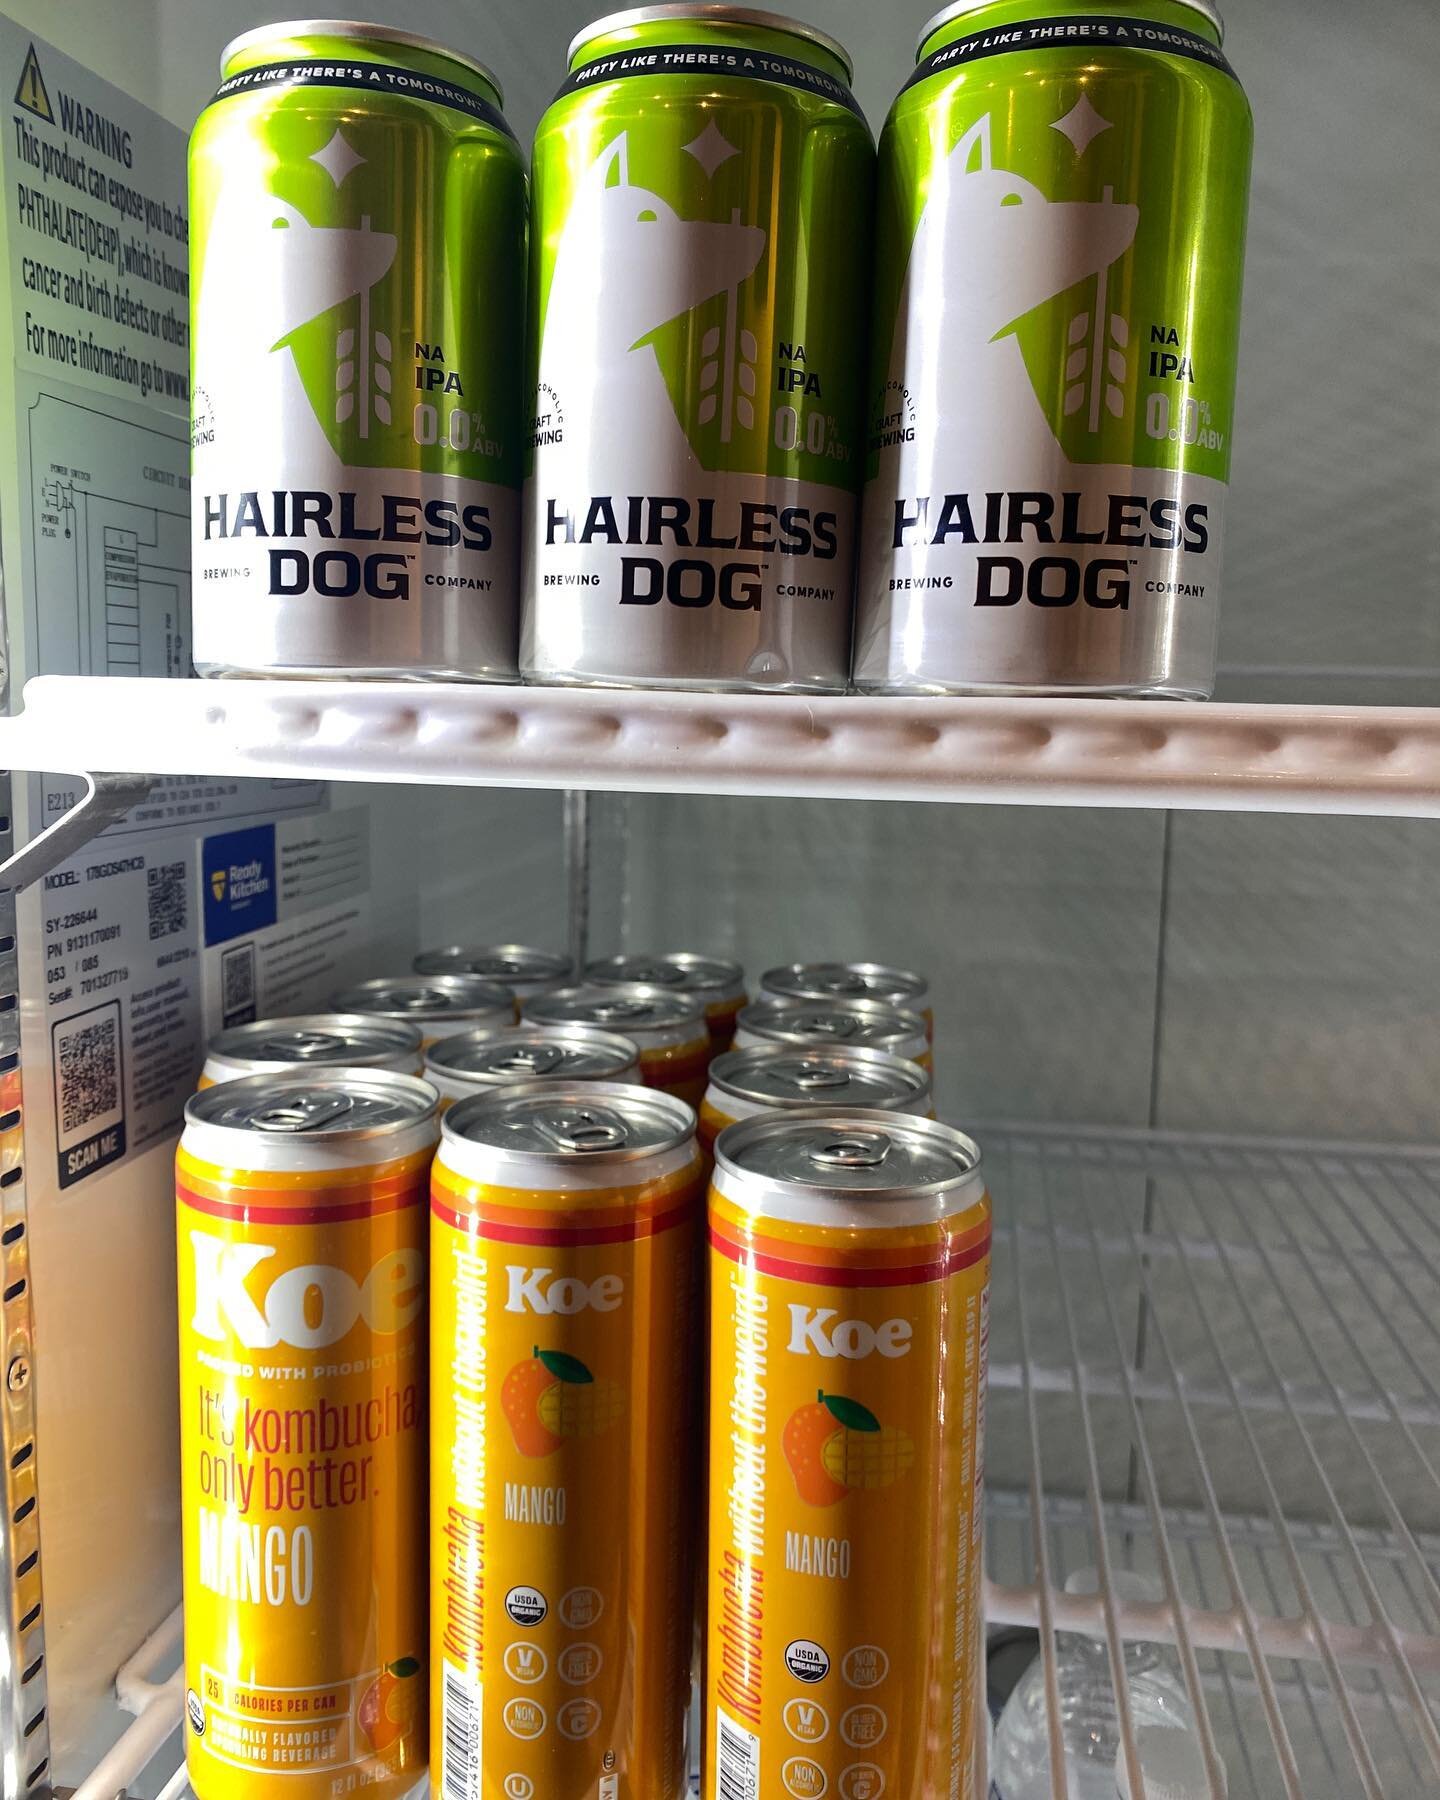 Packing our cooler with some fun new drinks for everyone to try! What would you like to see?!
&bull;
Don&rsquo;t forget Wednesday orders are due at 5PM- select Wednesday at checkout 😆